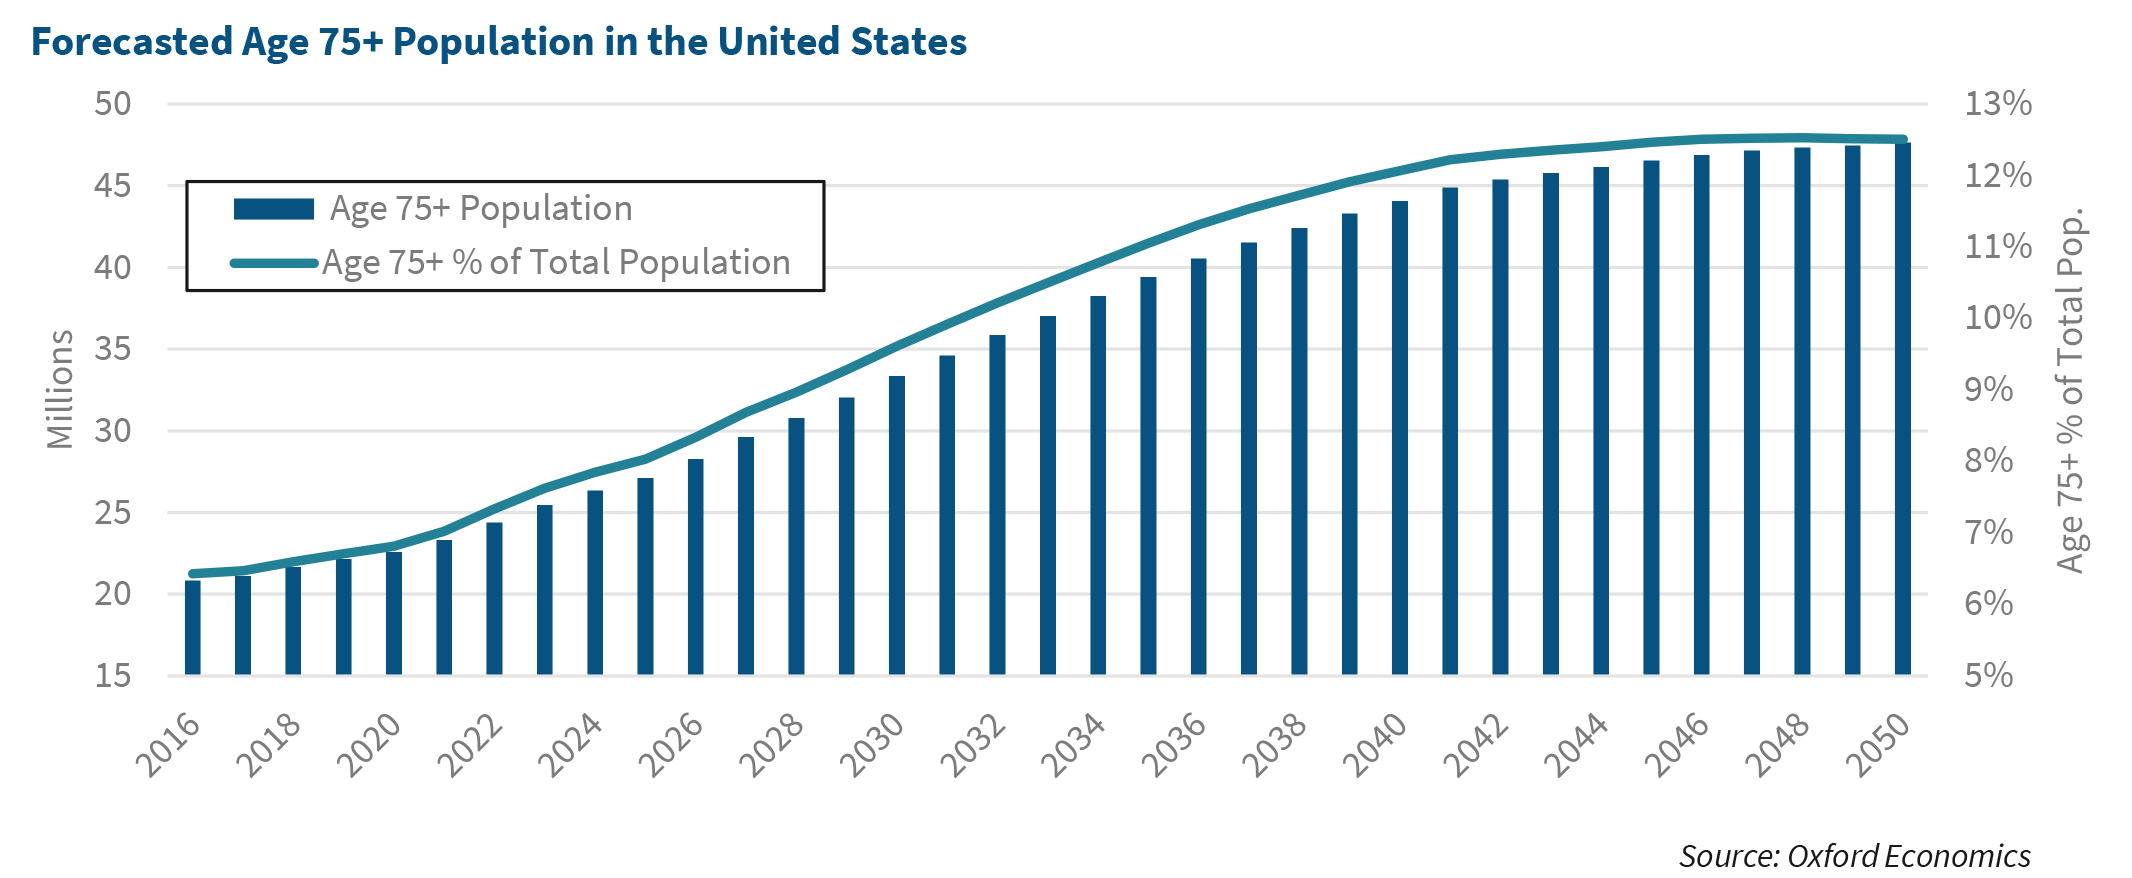 Forecasted Age 75+ Population in the United States